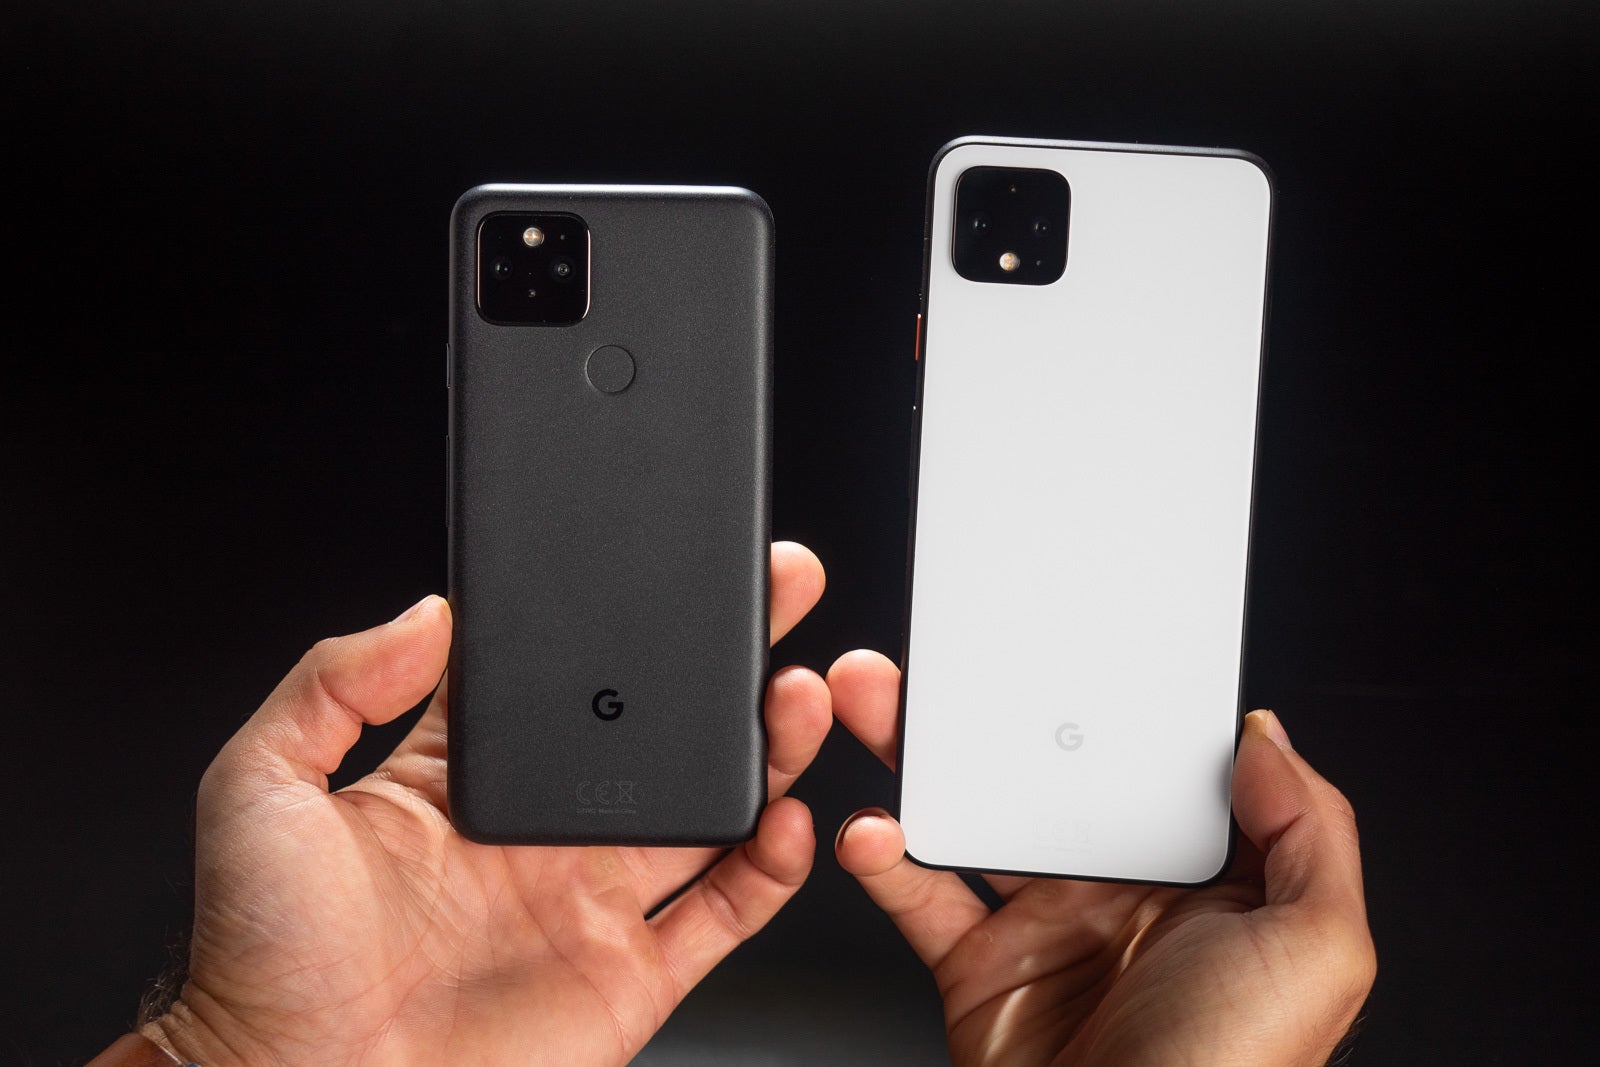 Expanding Apps On Google Pixel 4: Step-by-Step Guide